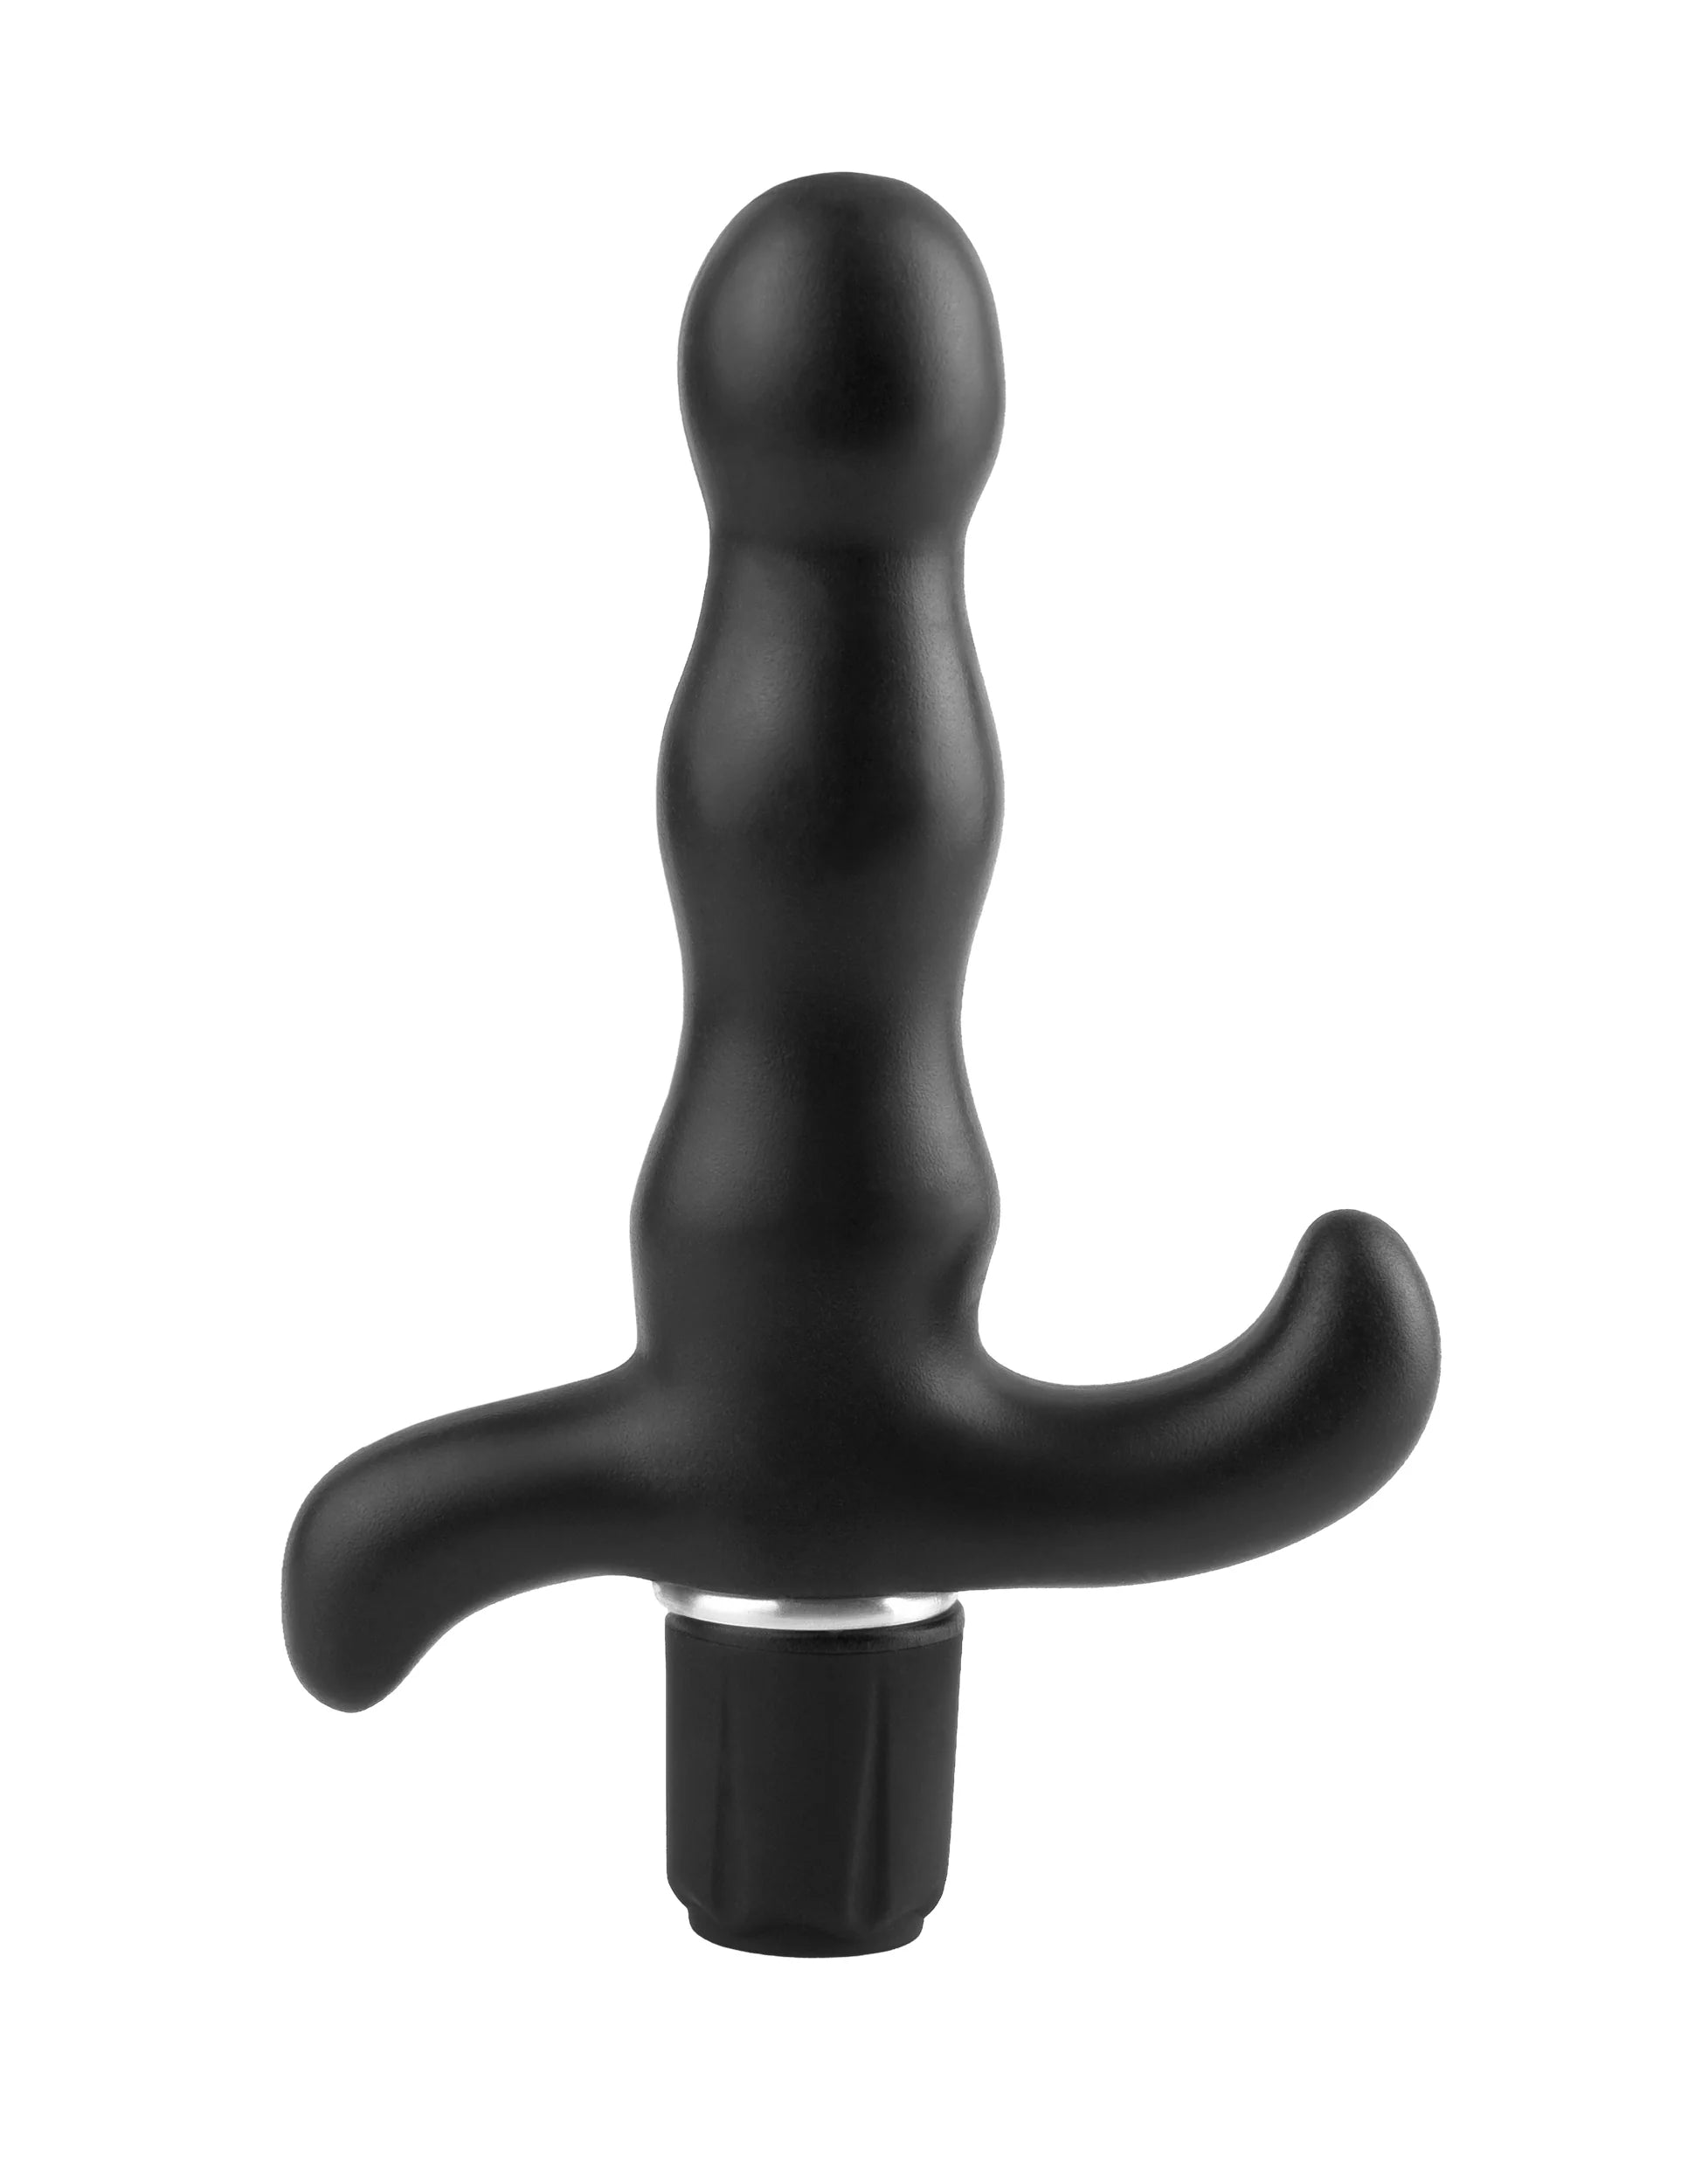 Pipedream Anal Fantasy Collection 9-Function Prostate Vibrator